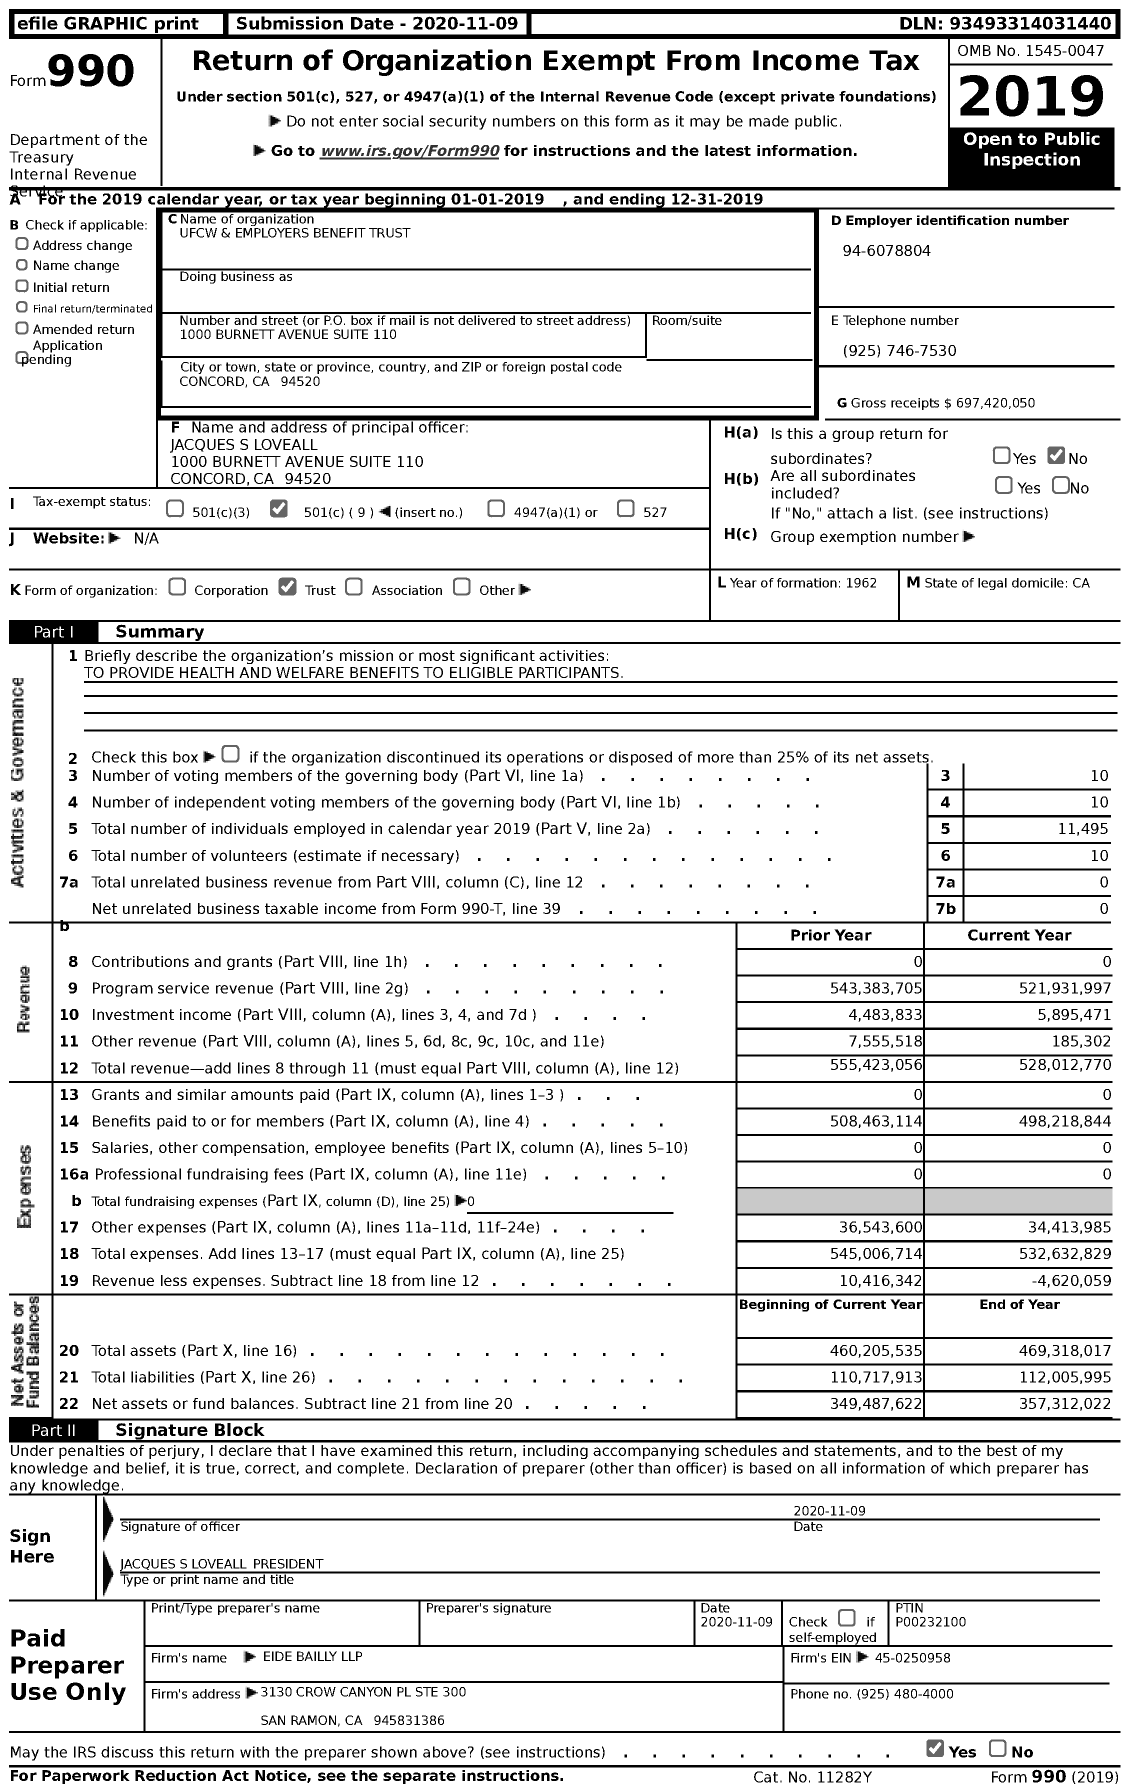 Image of first page of 2019 Form 990 for Ufcw and Employers Benefit Trust